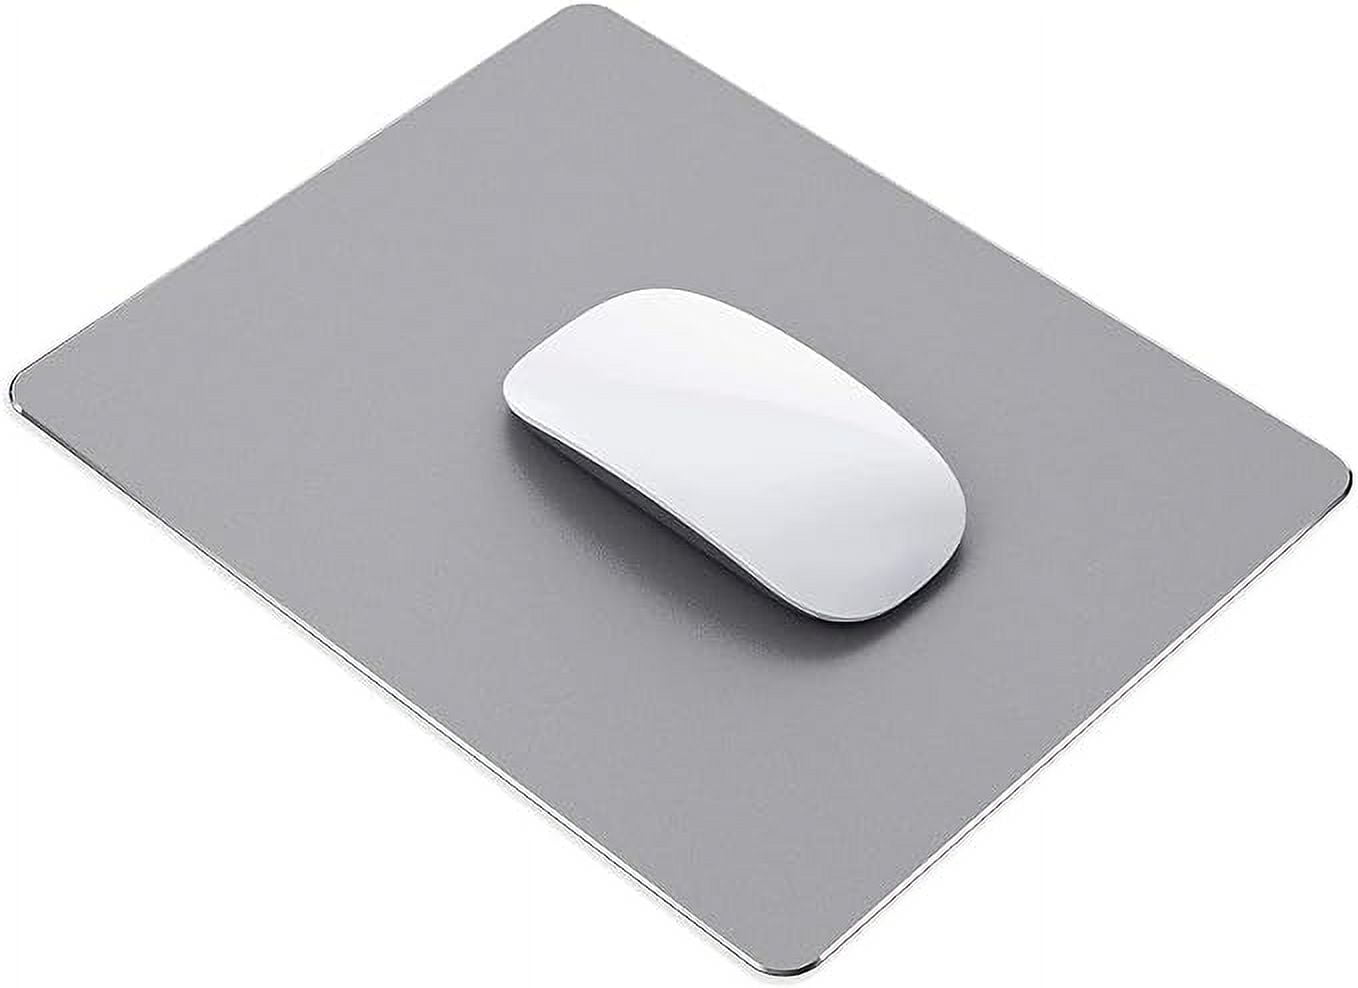 Vaydeer RNAB07FJ6VZ2R metal aluminum mouse pad hard silver clear modern  ultra thin double side design mouse mat waterproof fast and accurate contro